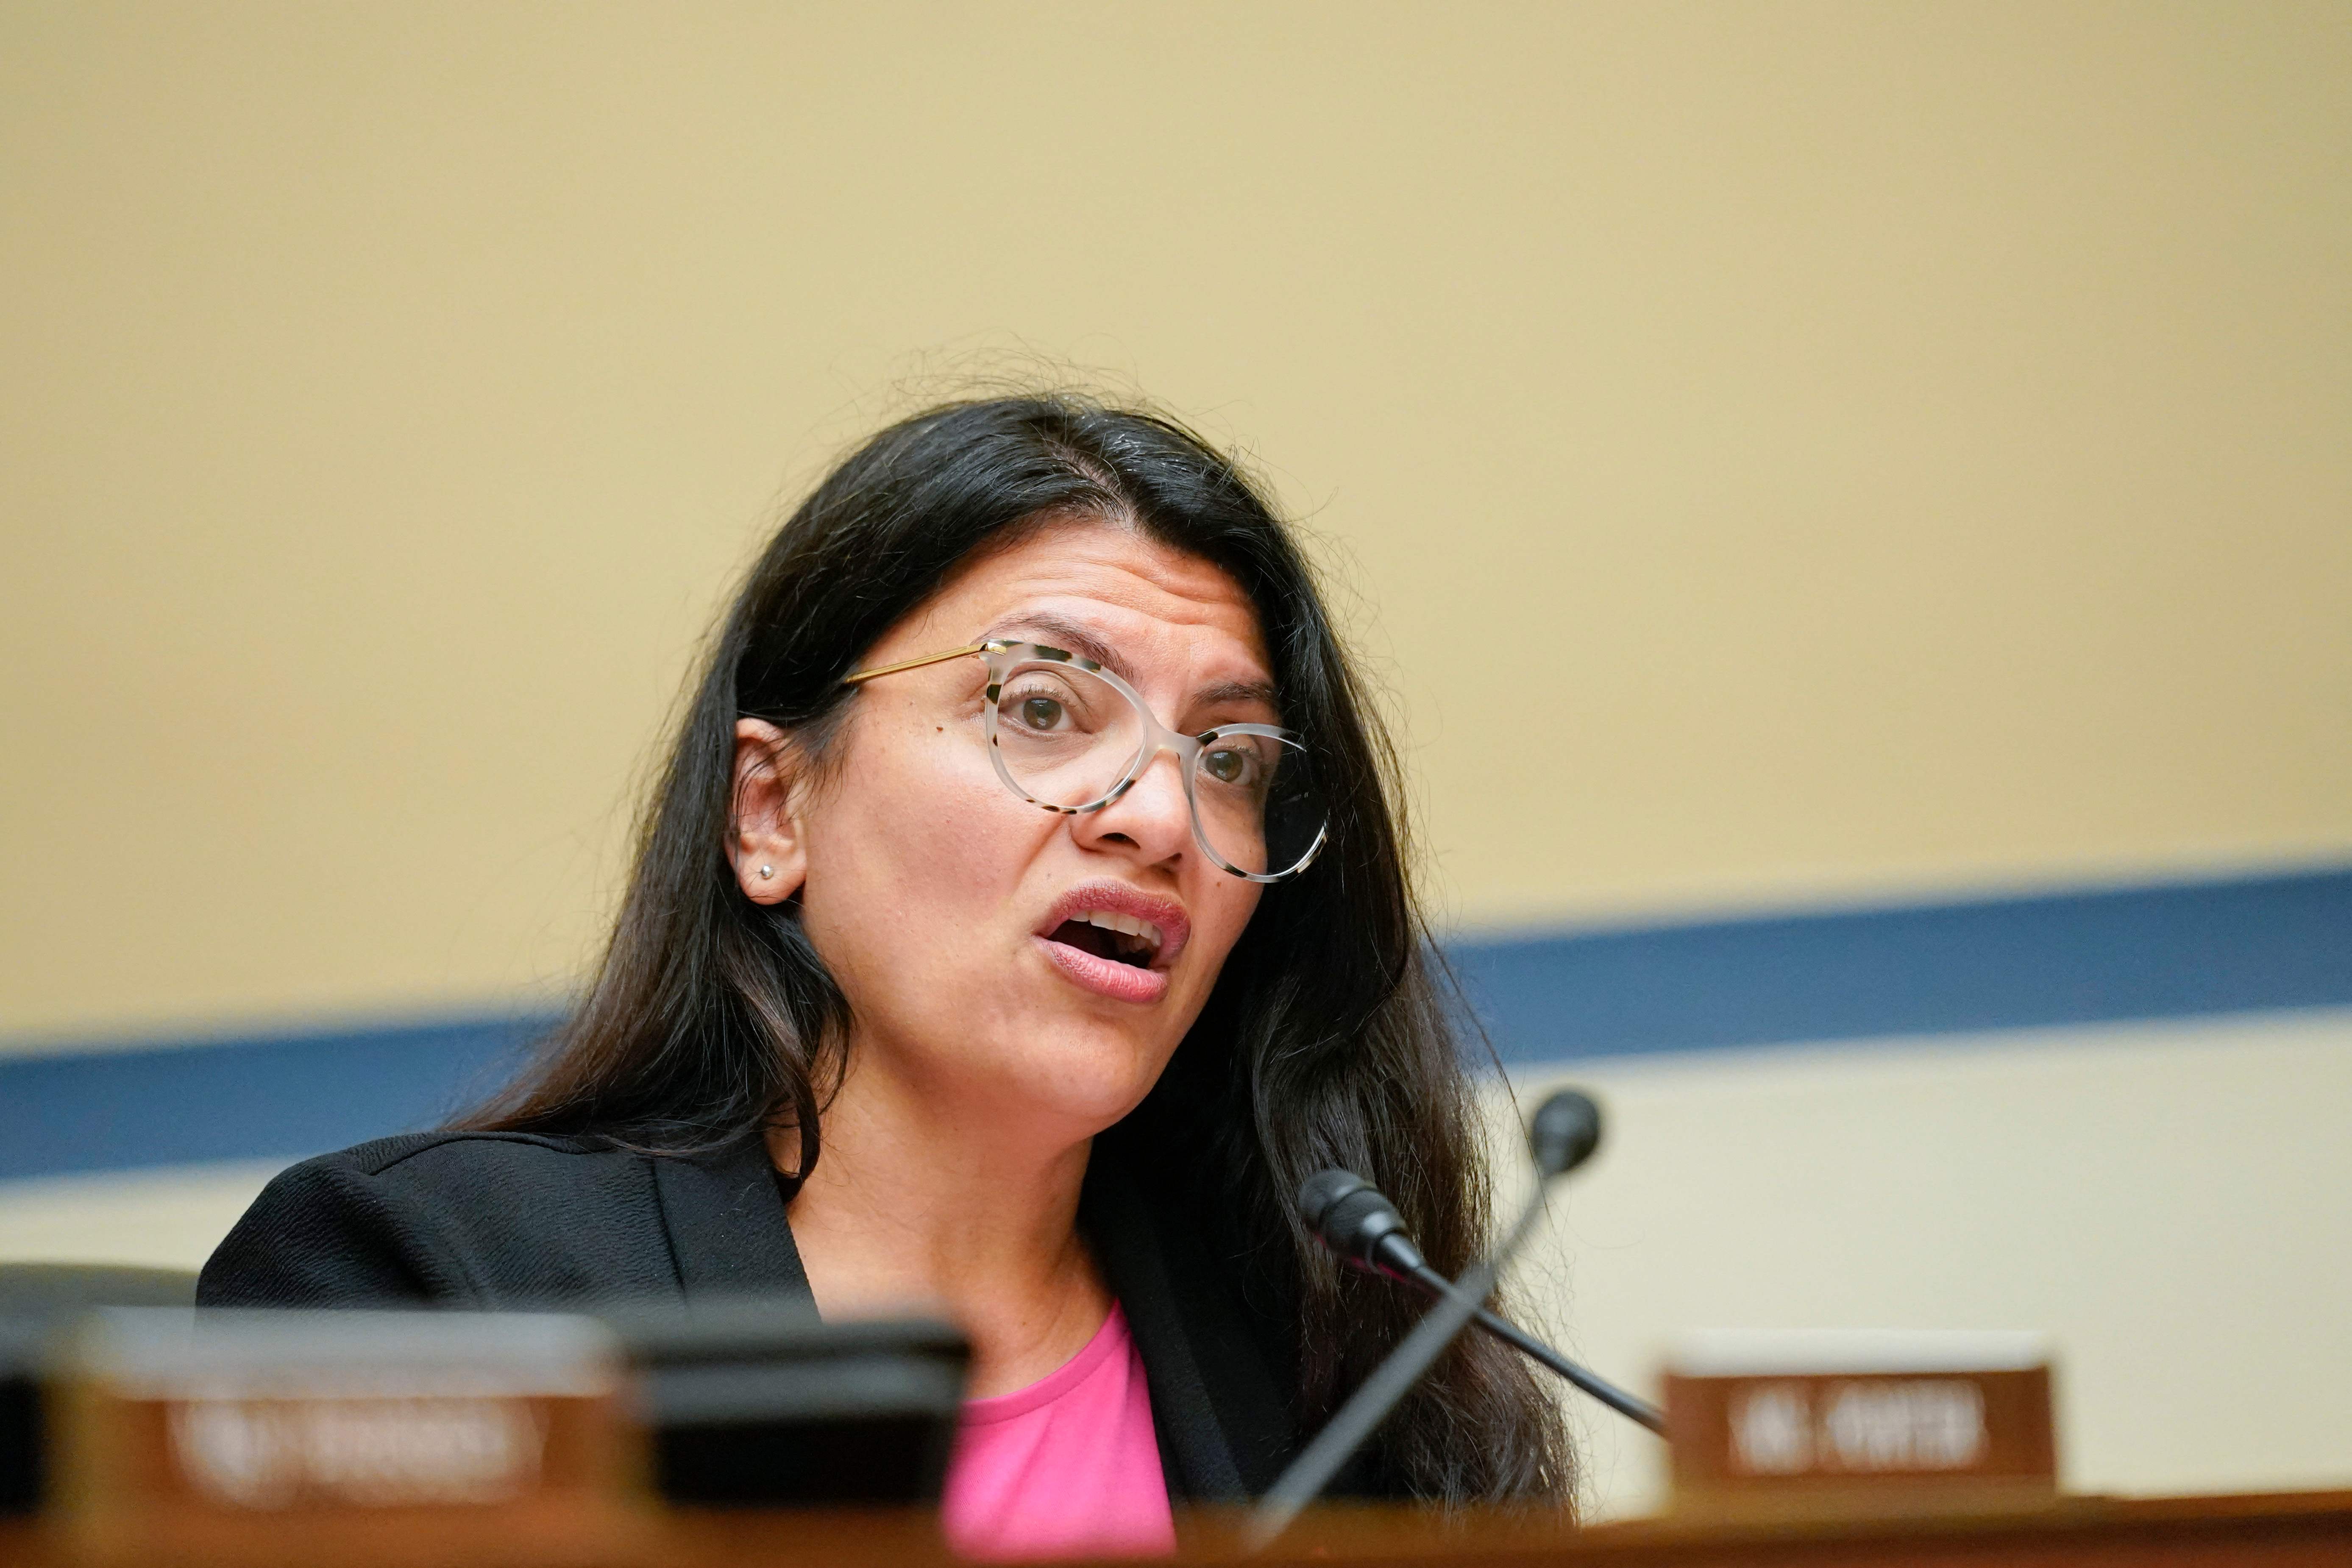 US Representative Rashida Tlaib (D-MI) speaks during a House Committee on Oversight and Reform hearing on gun violence on Capitol Hill in Washington, DC, on June 8, 2022